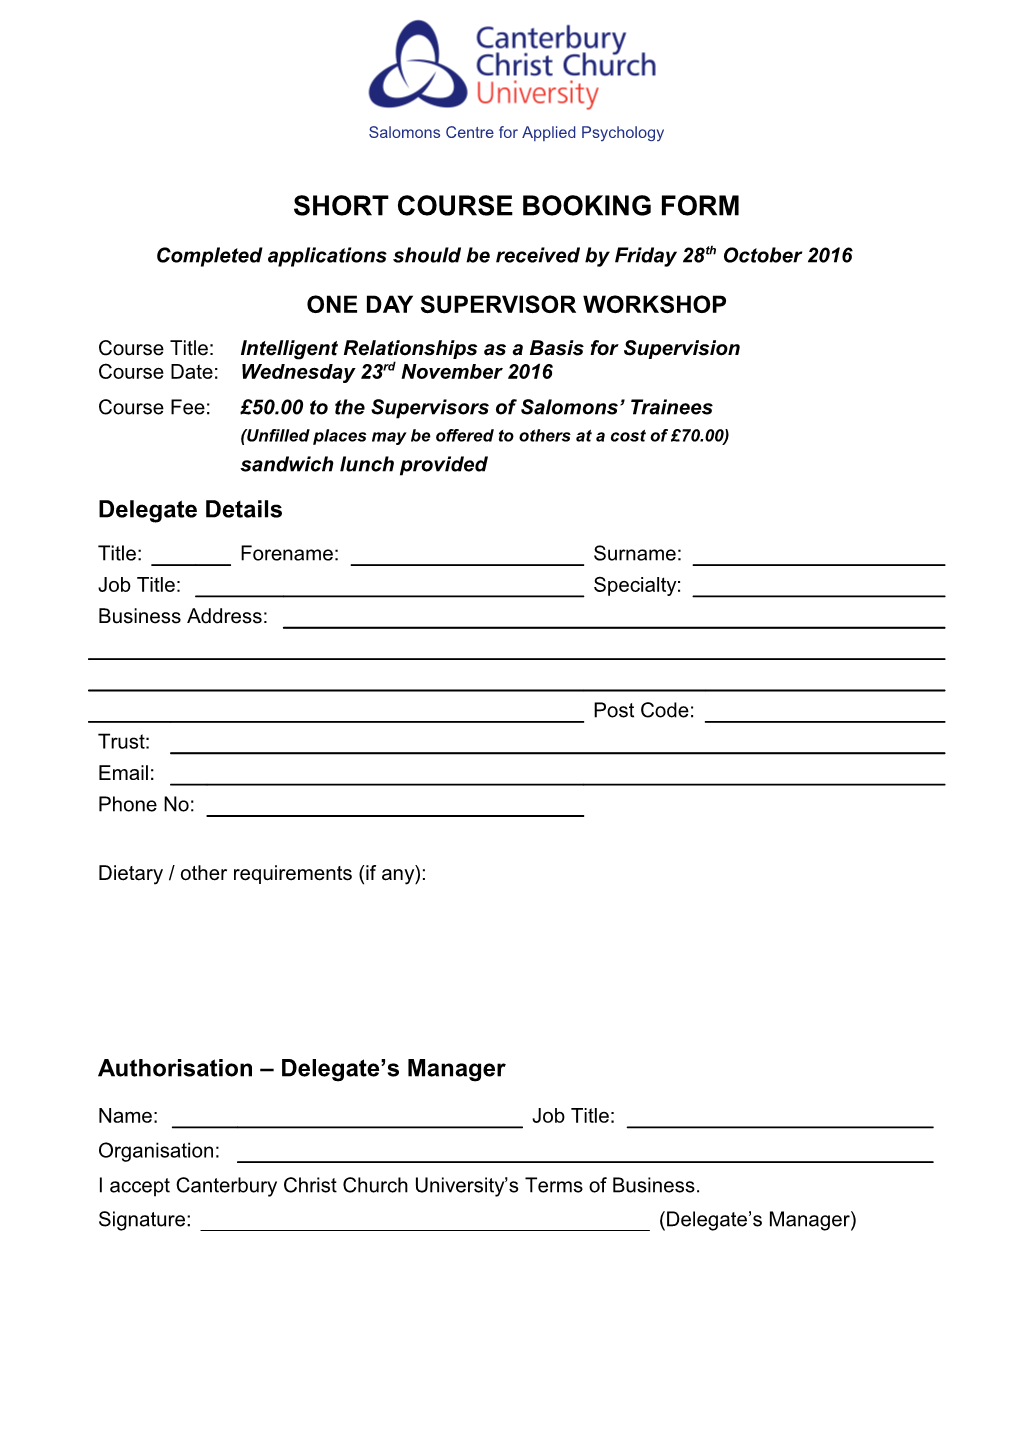 Short Course Booking Form